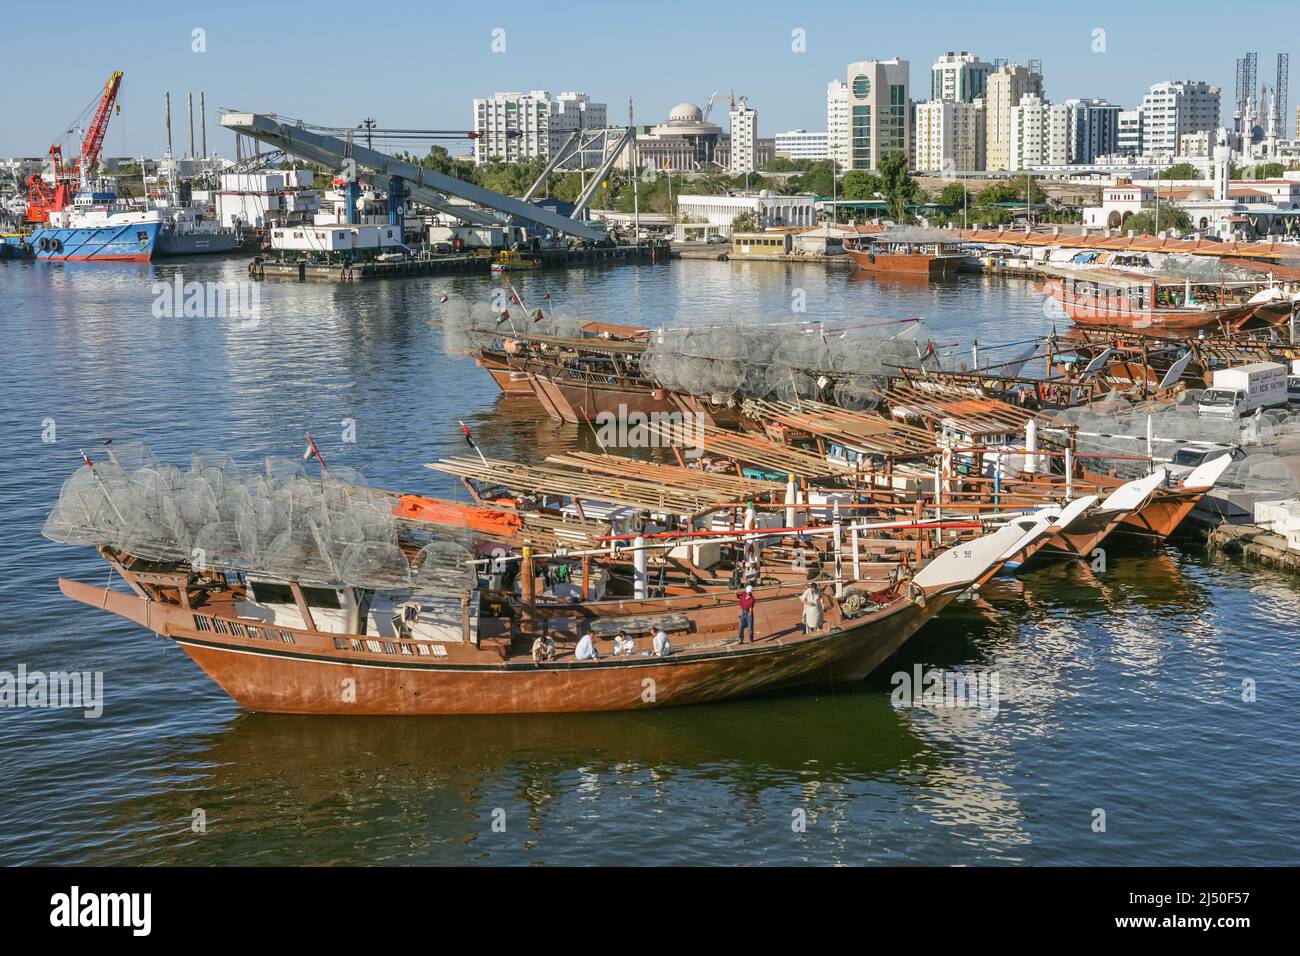 The crew of a traditional fishing dhow, laden with gargours or fish traps, fishing near Sharjah Bridge in Sharjah in the United Arab Emirates. Stock Photo